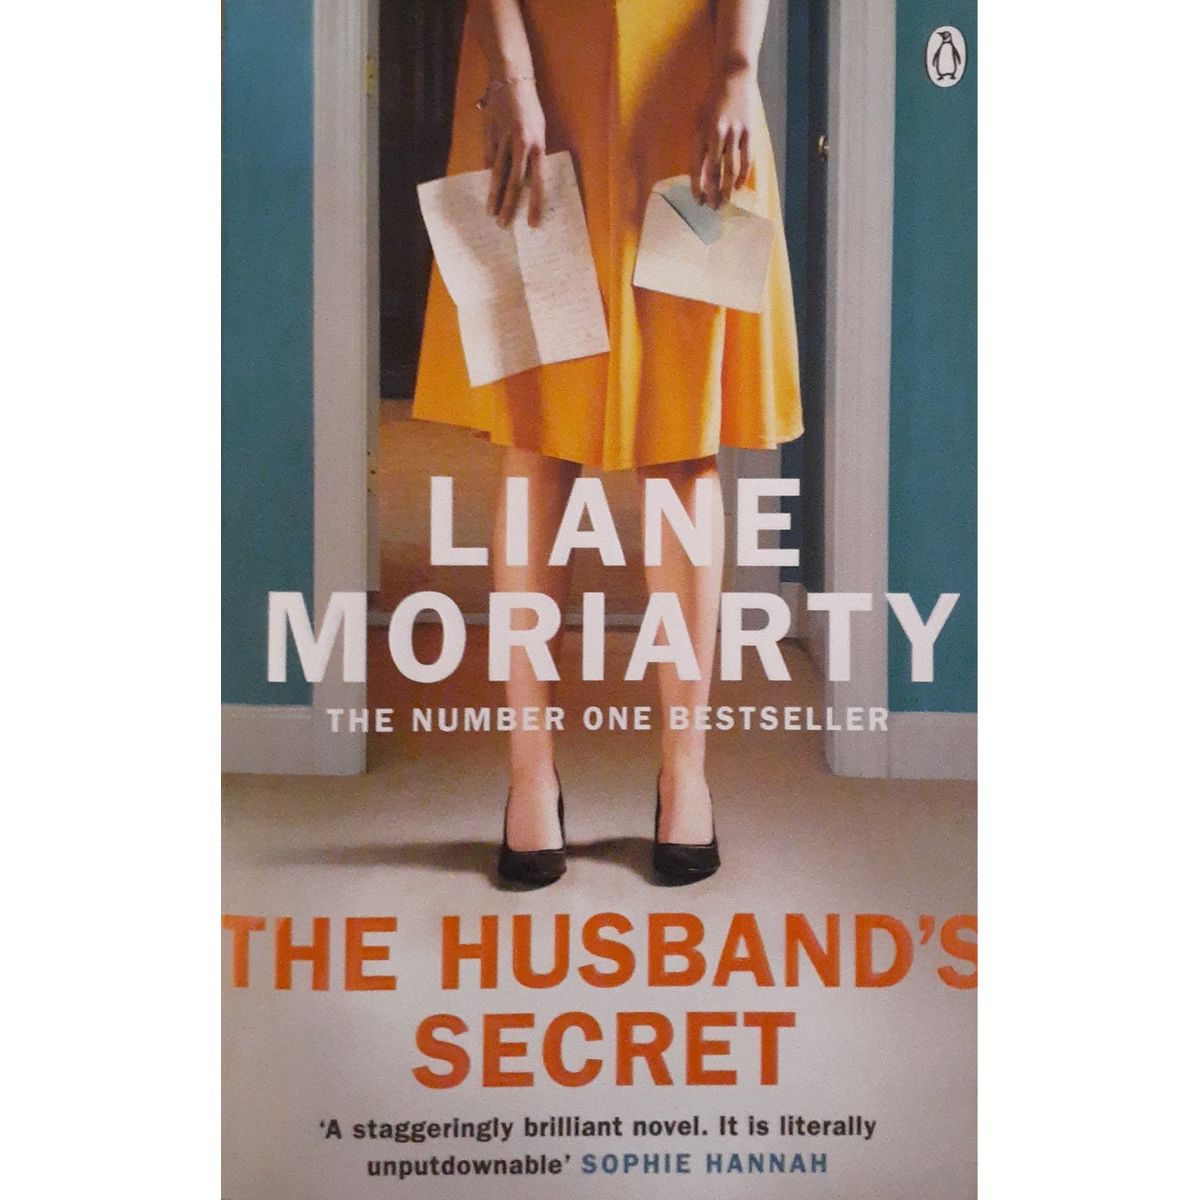 ISBN: 9781405911665 / 1405911662 - The Husband's Secret by Liane Moriarty [2013]